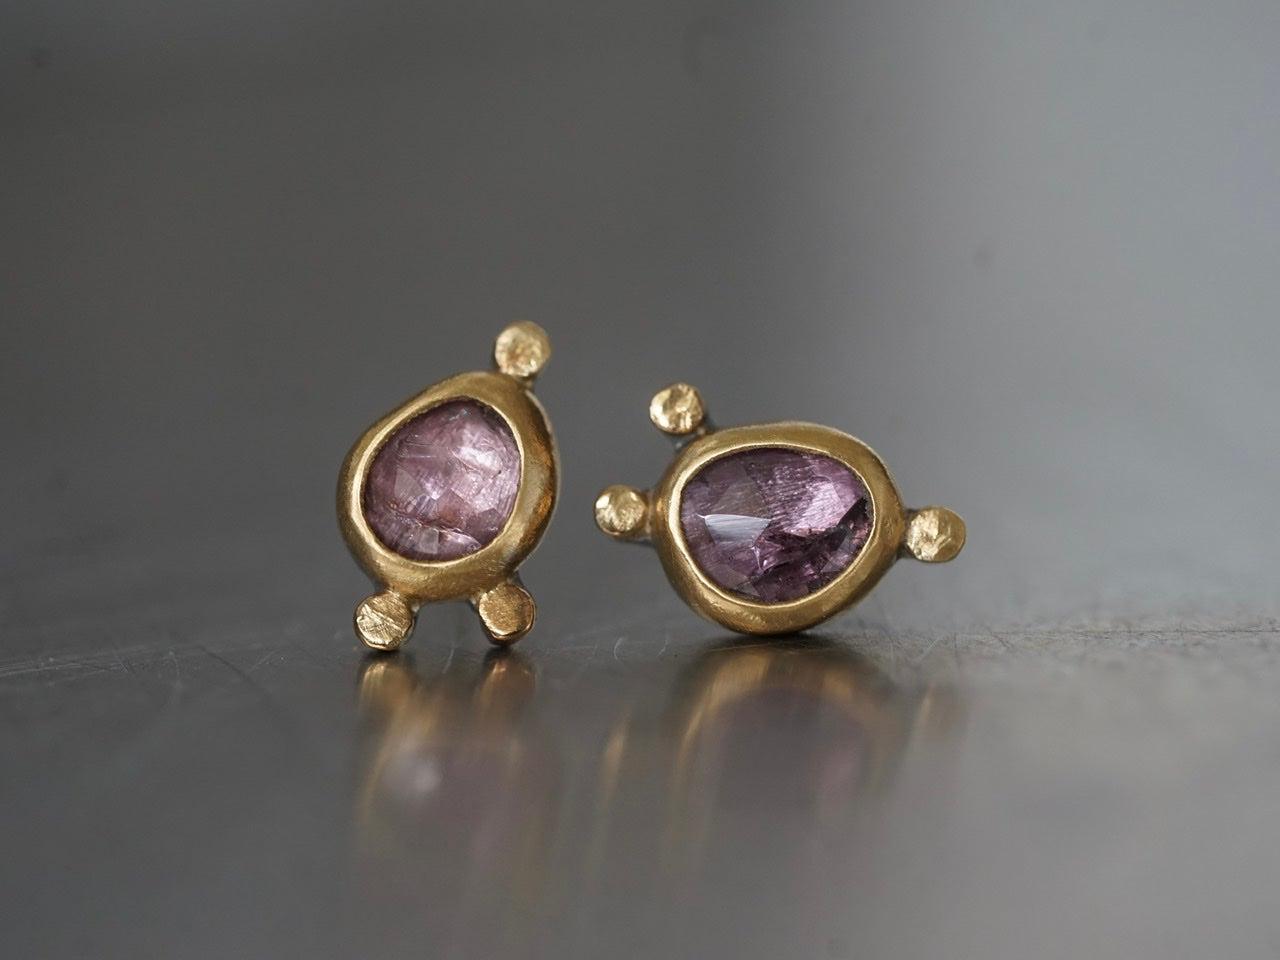 Lavender purple spinel and22k gold post earrings